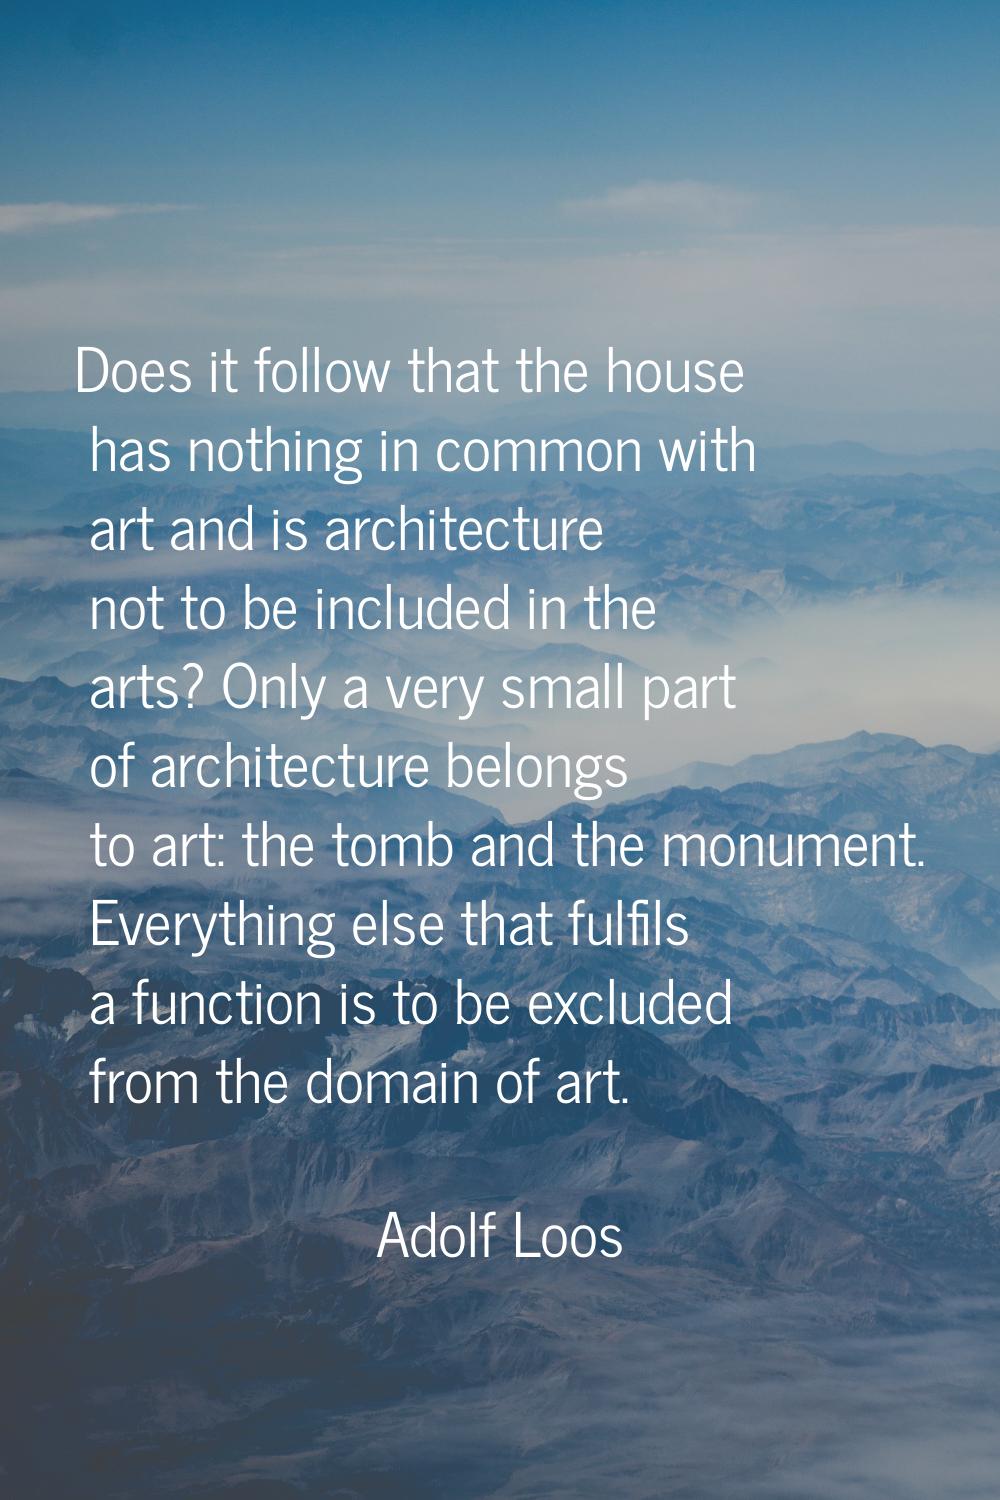 Does it follow that the house has nothing in common with art and is architecture not to be included